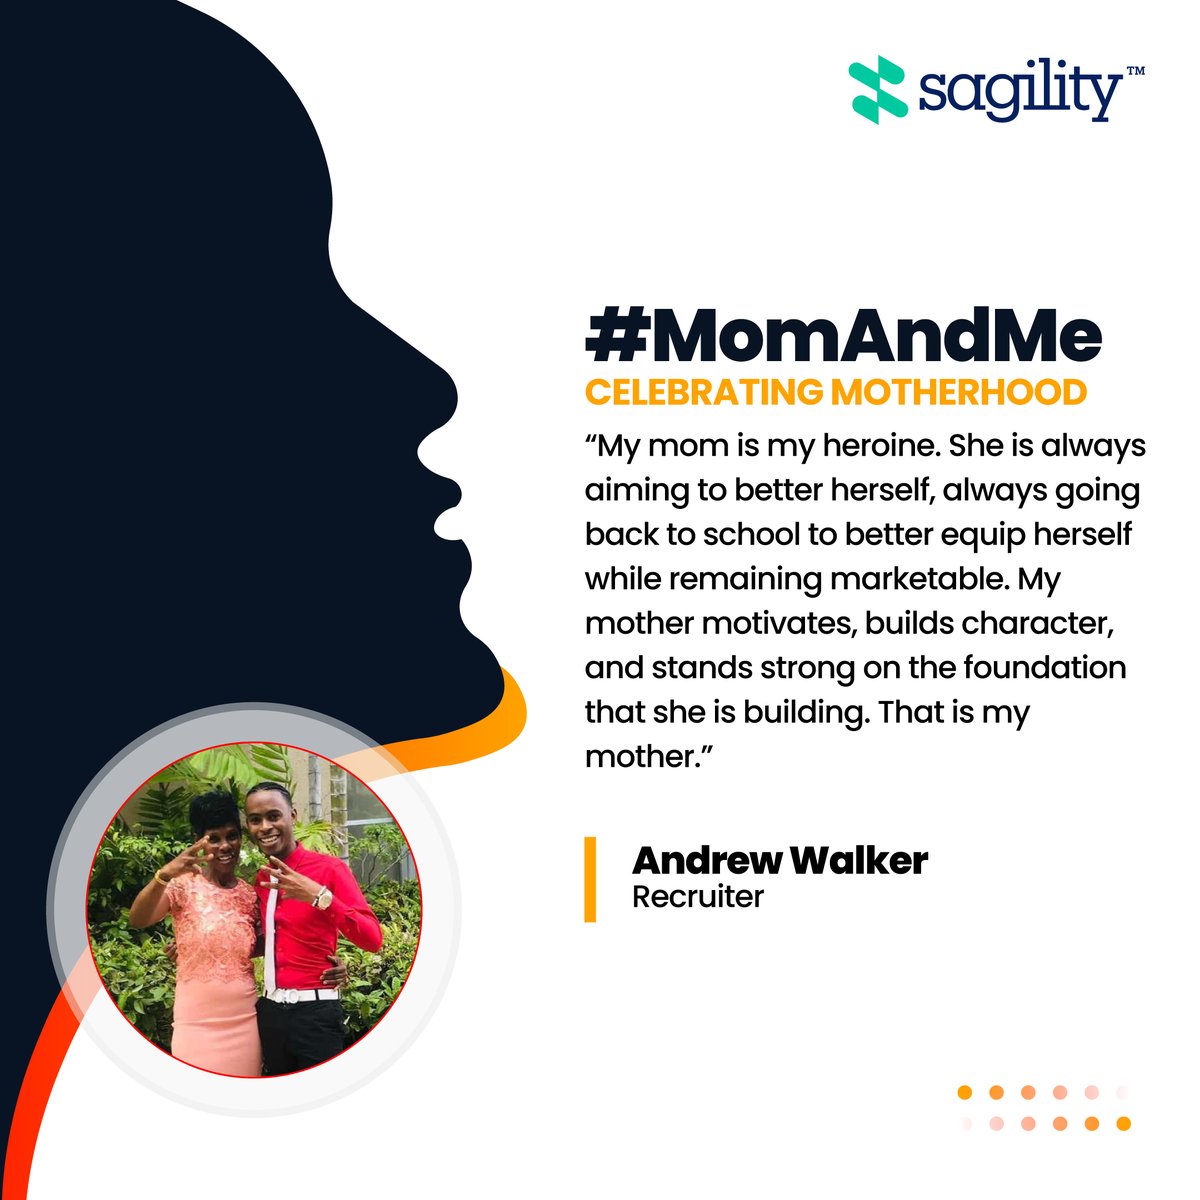 This Mother’s Day, we asked our people to share their most cherished moments and heartwarming stories about their mothers.

#Sagility #WeAreSagility #SOARWithSagility #MomAndMe #MothersDay #FamilyStories #CelebratingMothers